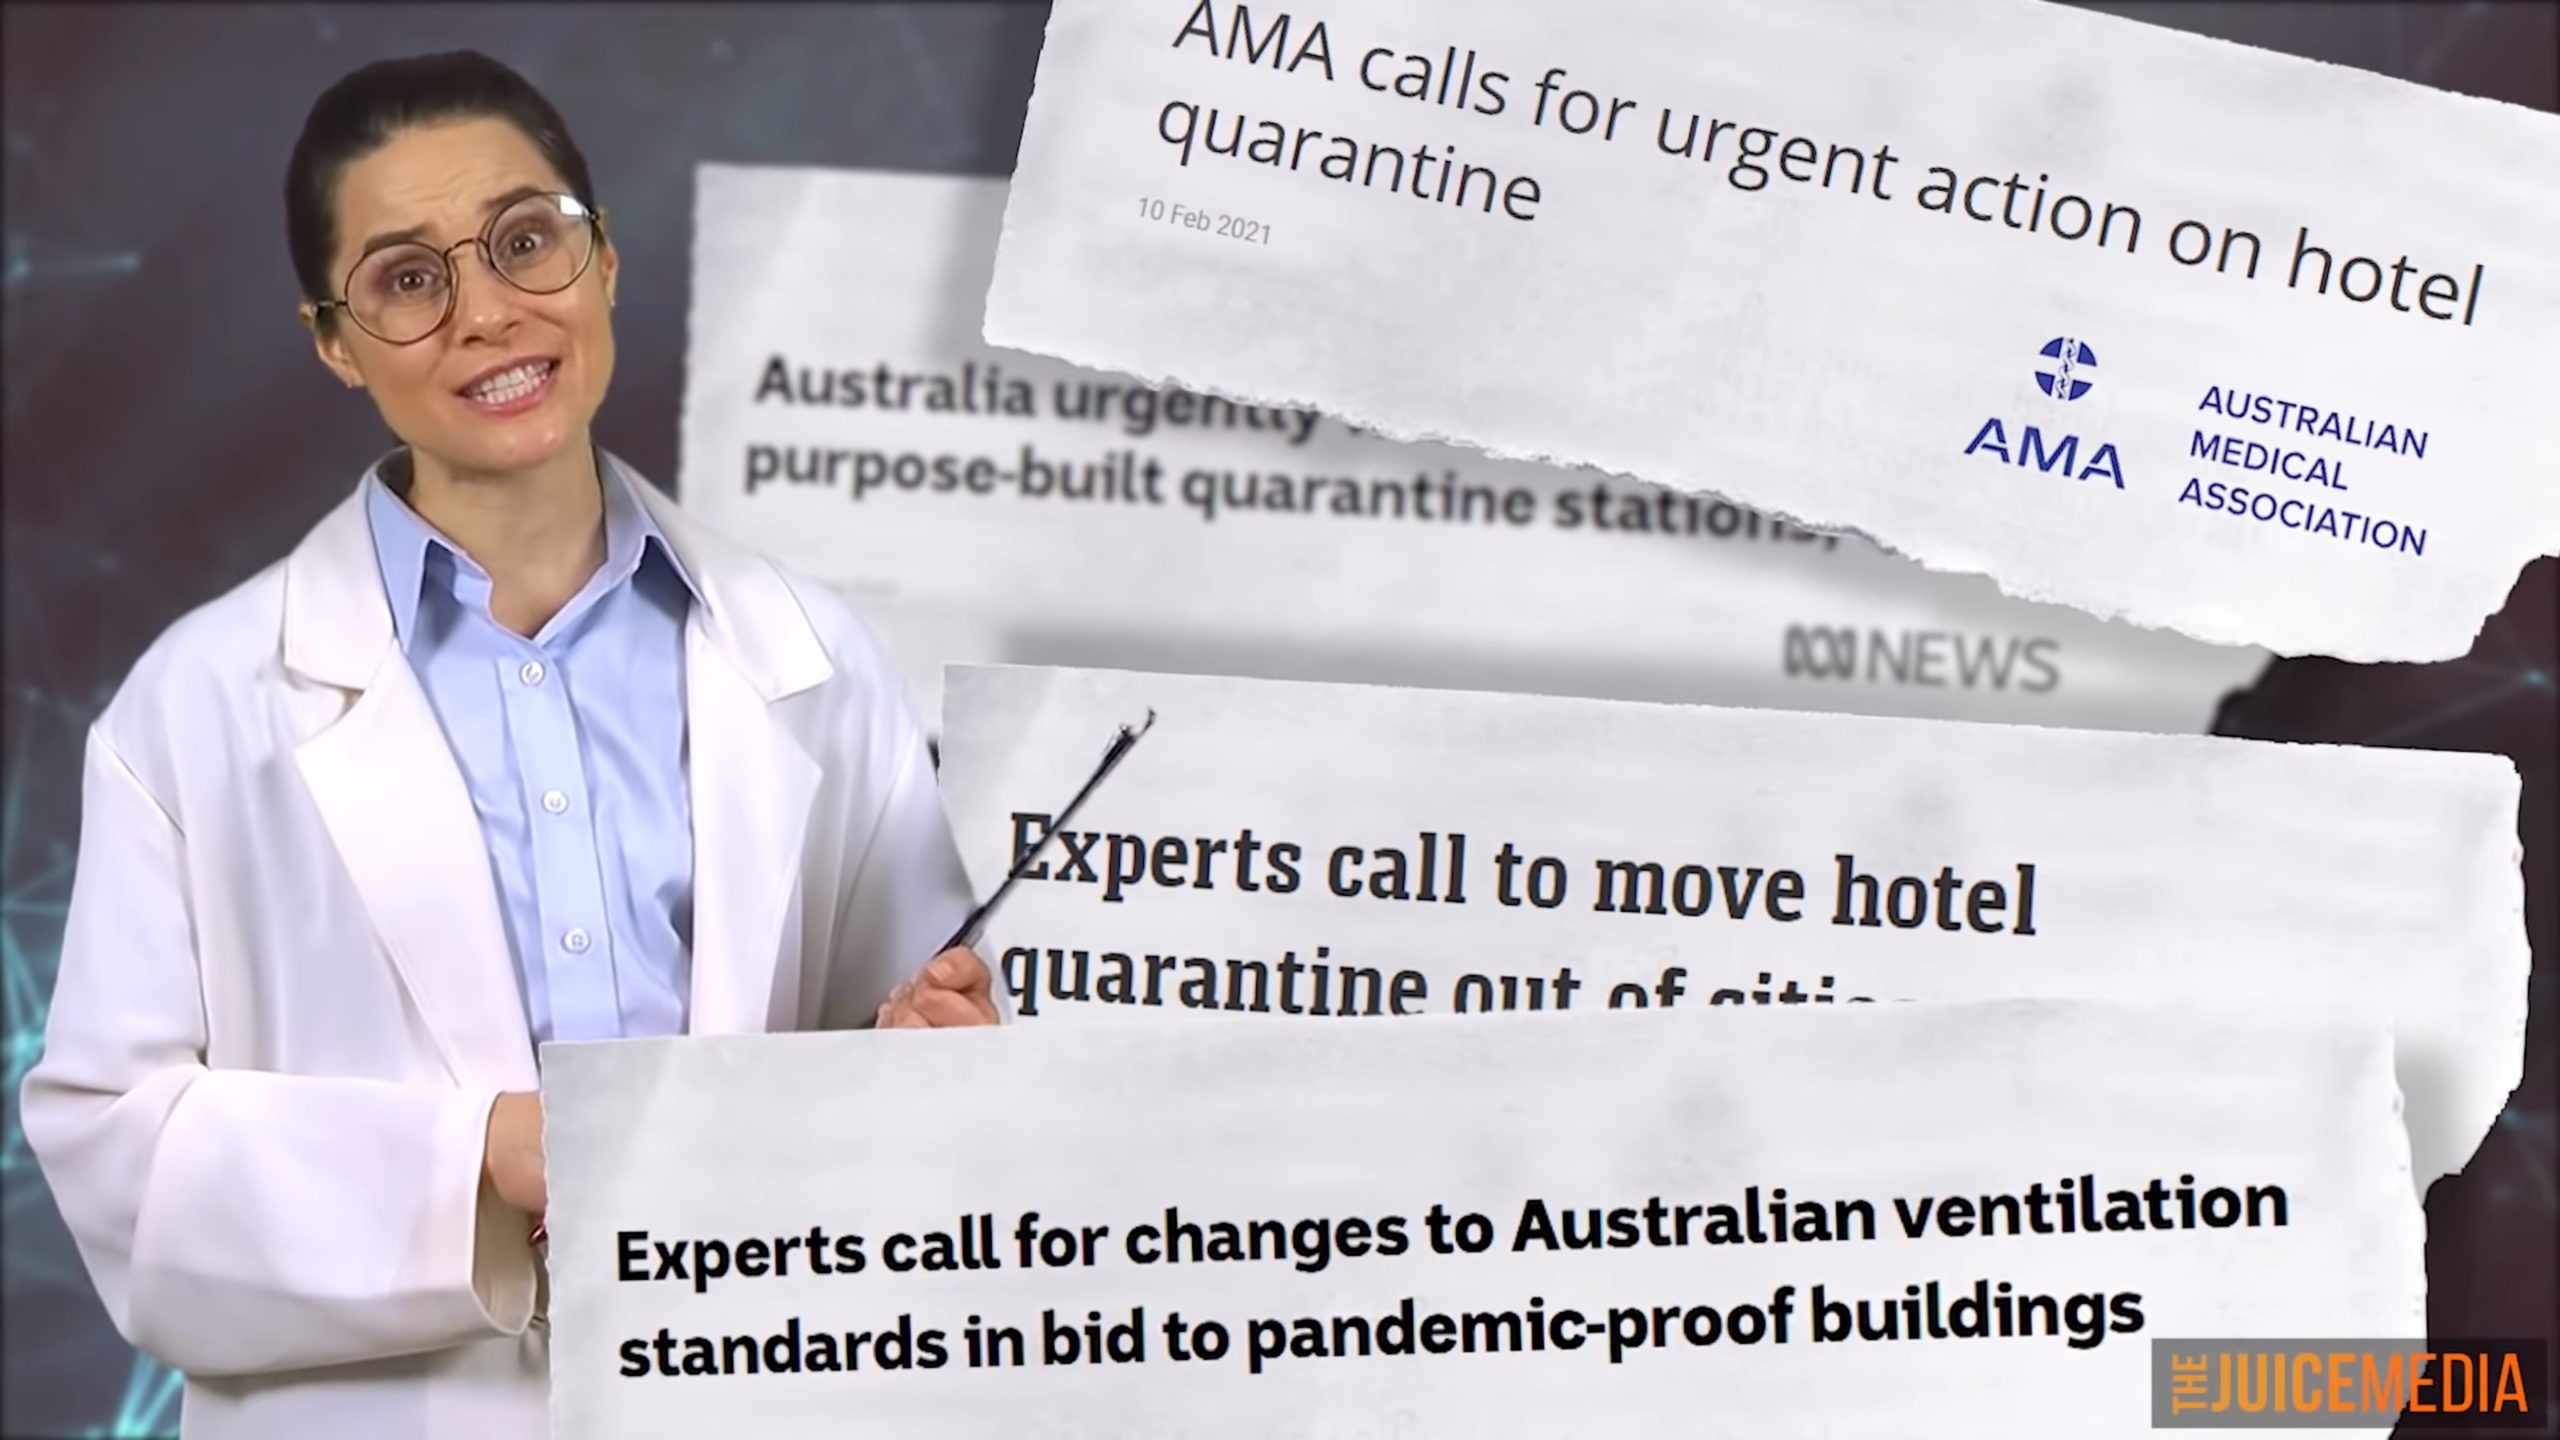 Screenshot from “Honest Government: Ad Hotel Quarantine and Vaccines” by The Juice Media, 30 July 2021. Shown are headlines describing how experts are calling for urgent action on Covid hotel quarantine in Australia. Photo: The Juice Media